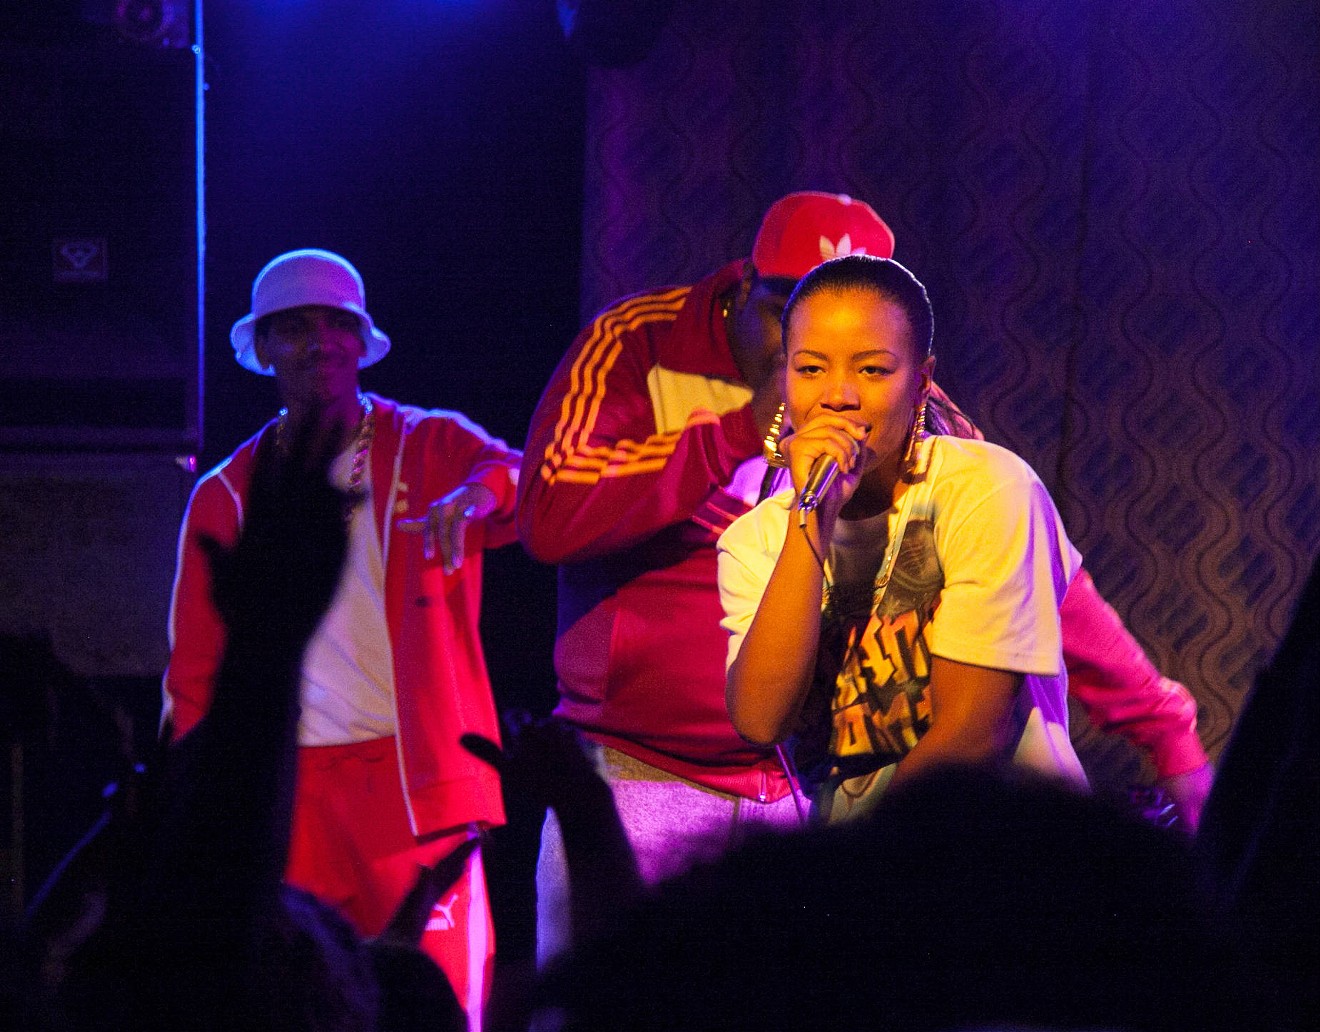 Newcomer Chante Adams portrays Roxanne Shante, the rap-battle prodigy who rose to fame as an adolescent and set a precedent for future female emcees like Queen Latifah and Nicki Minaj, in Roxanne Roxanne.